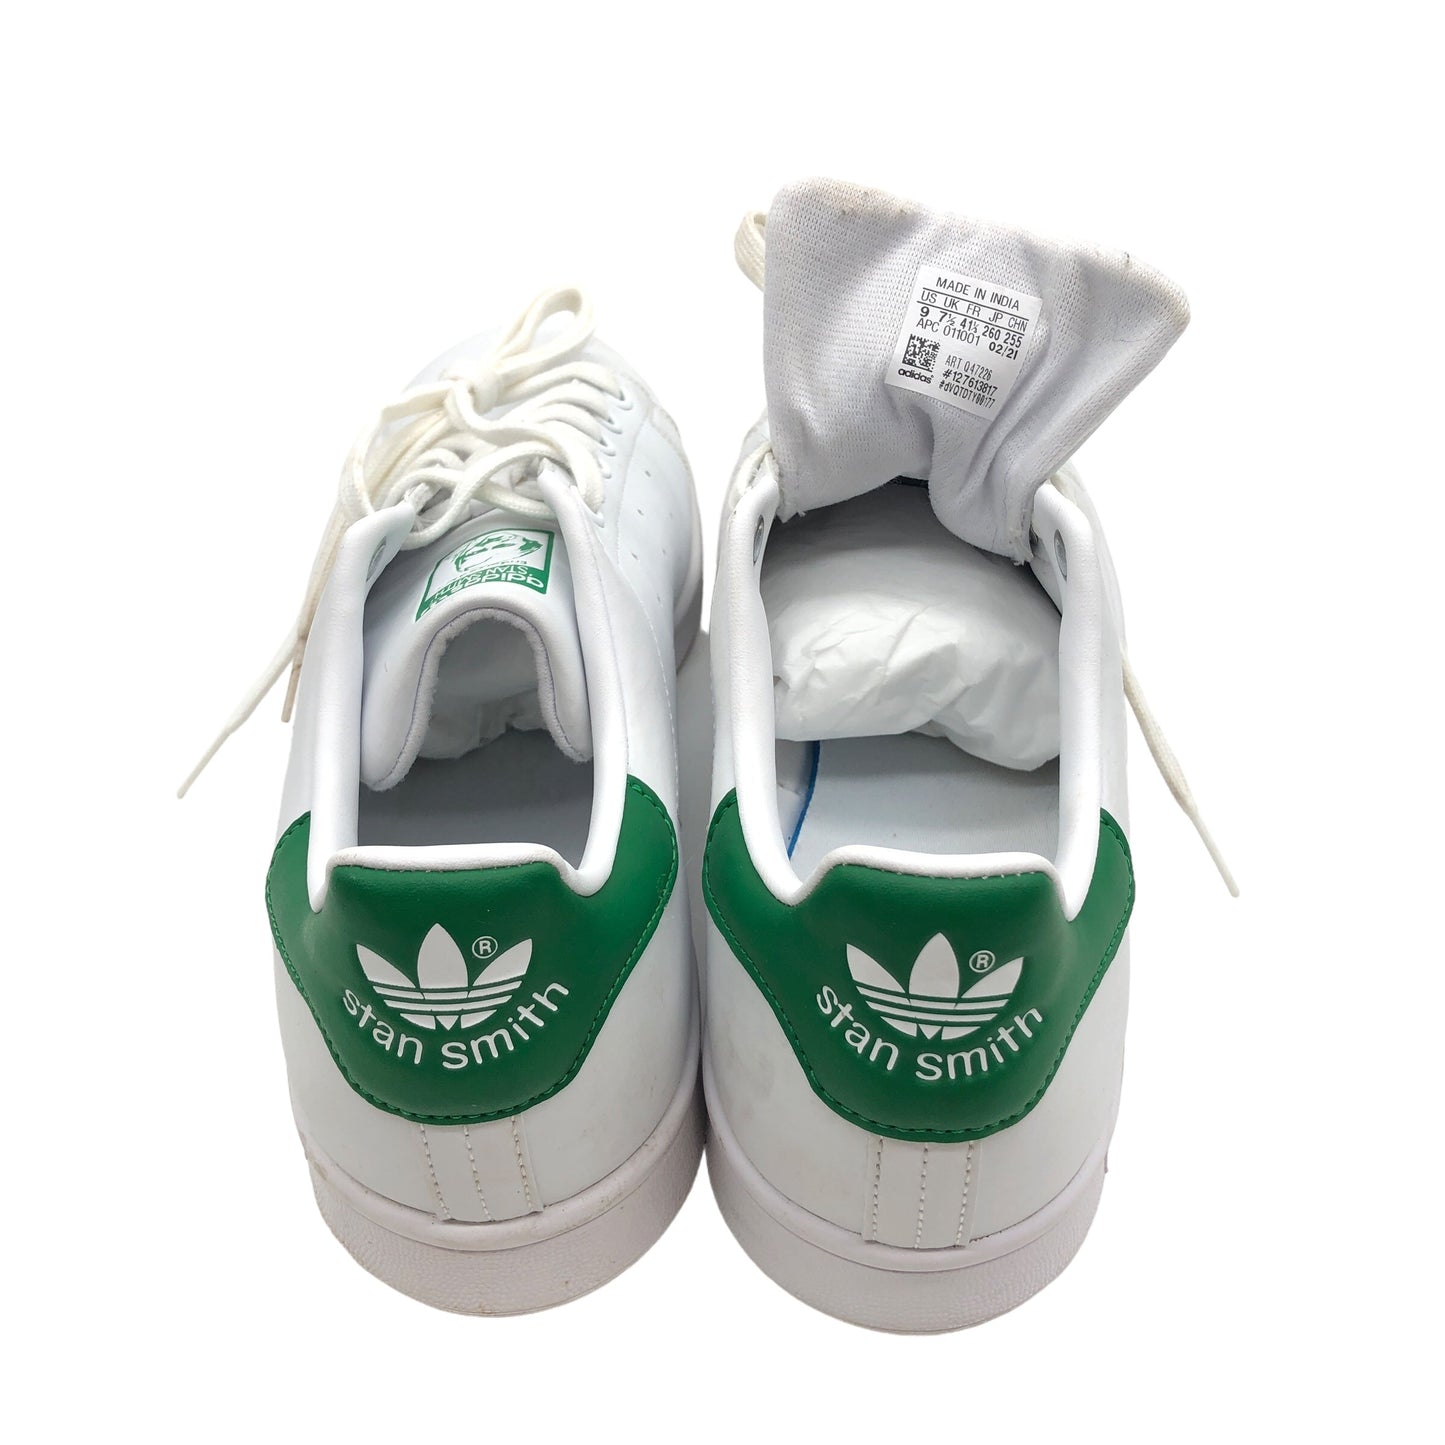 Green & White Shoes Athletic Adidas, Size 9